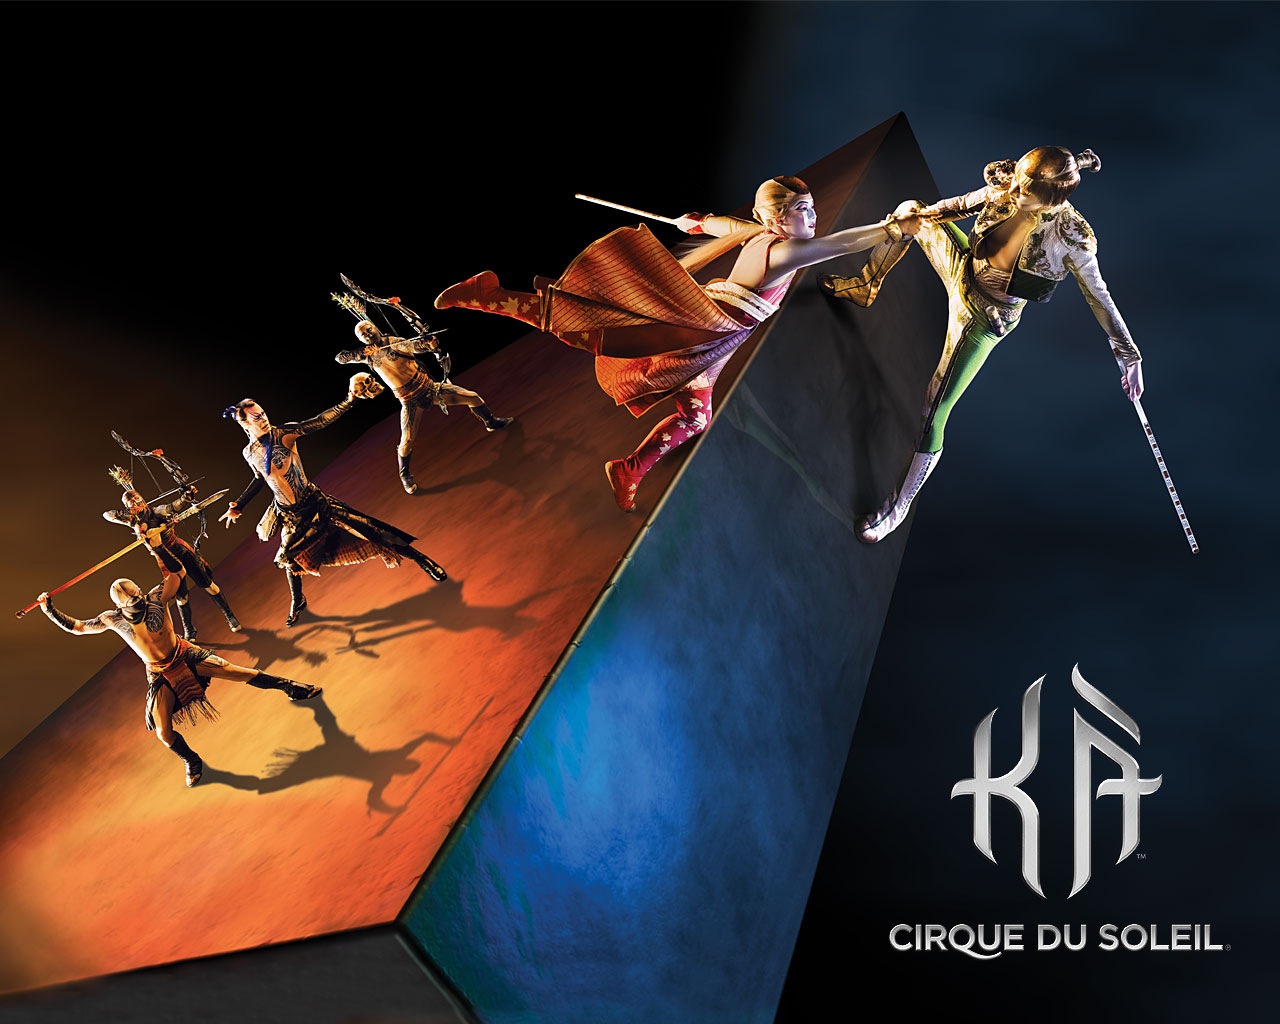 201107111323 SDCC11: Even Cirque du Soleil is coming to Comic Con 